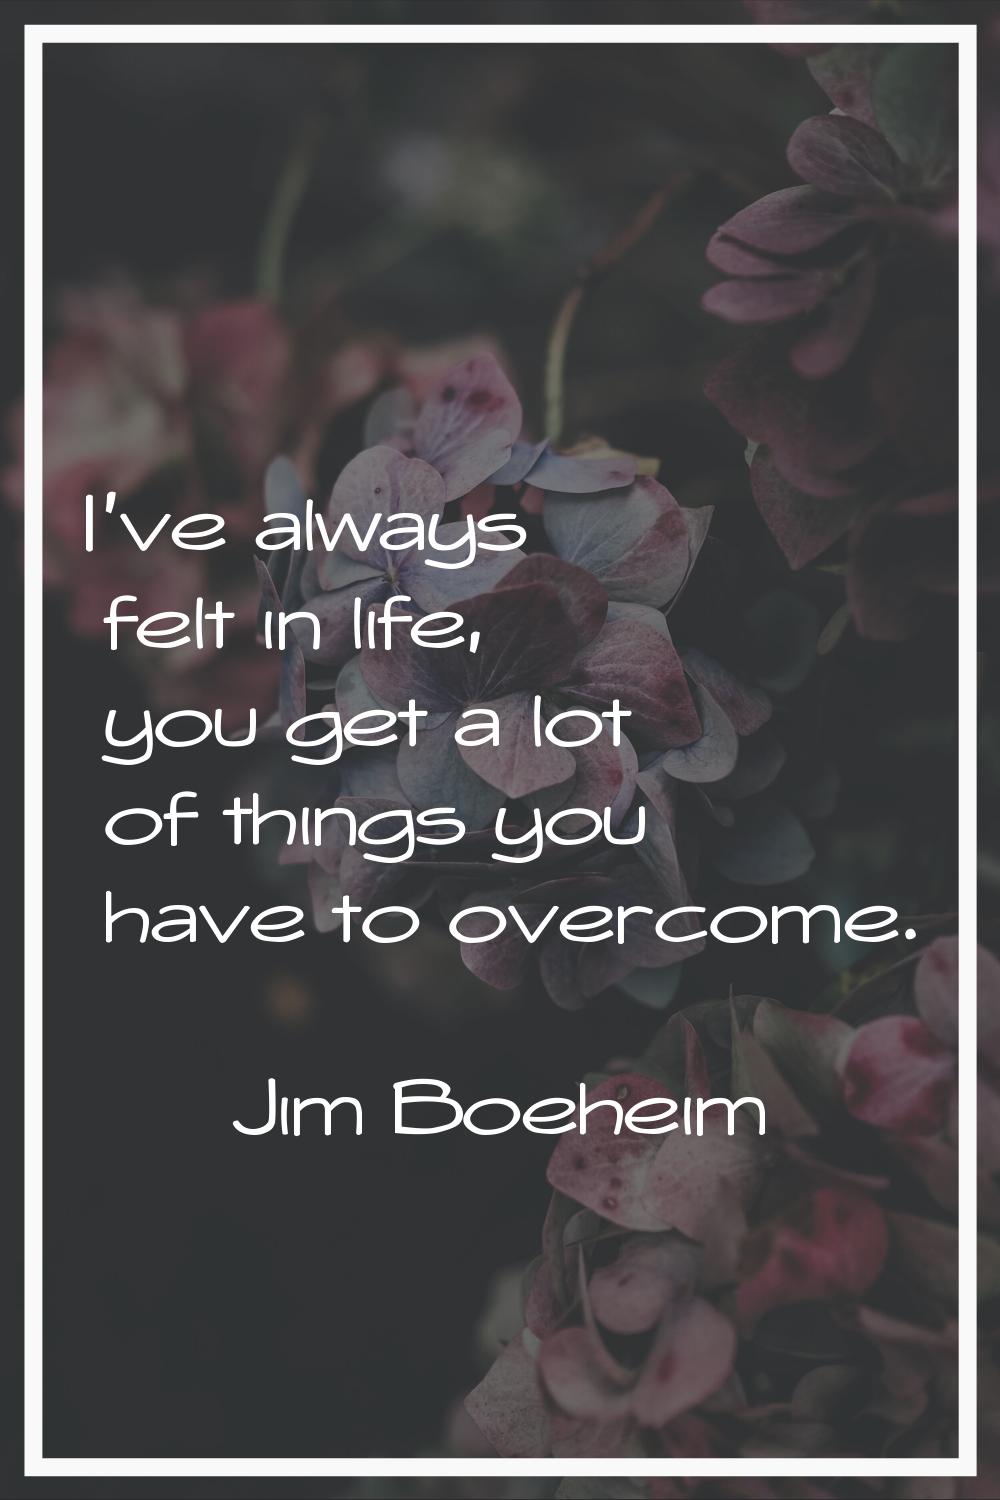 I've always felt in life, you get a lot of things you have to overcome.